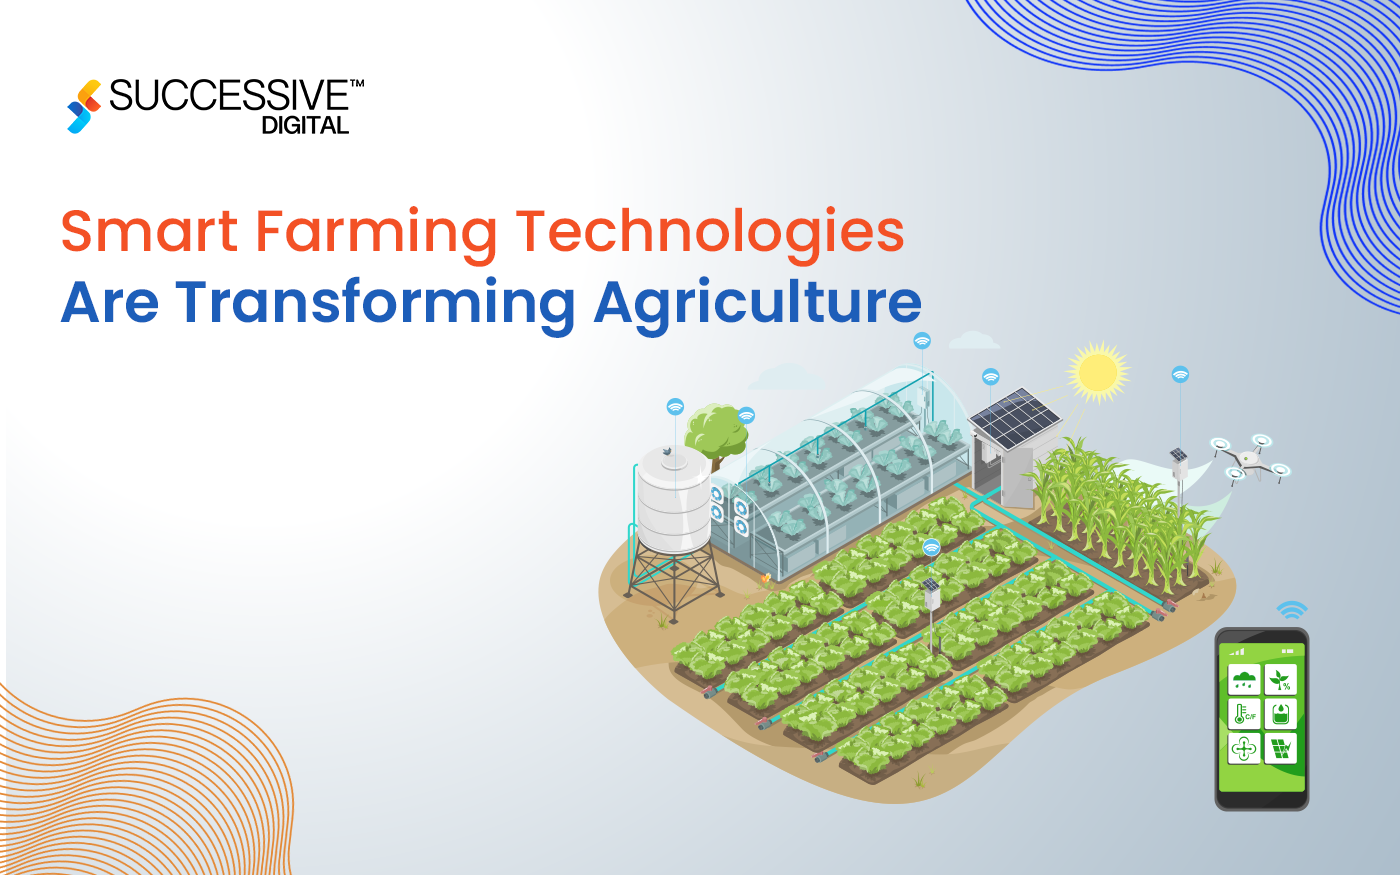 How Smart Farming Technologies Are Transforming Agriculture